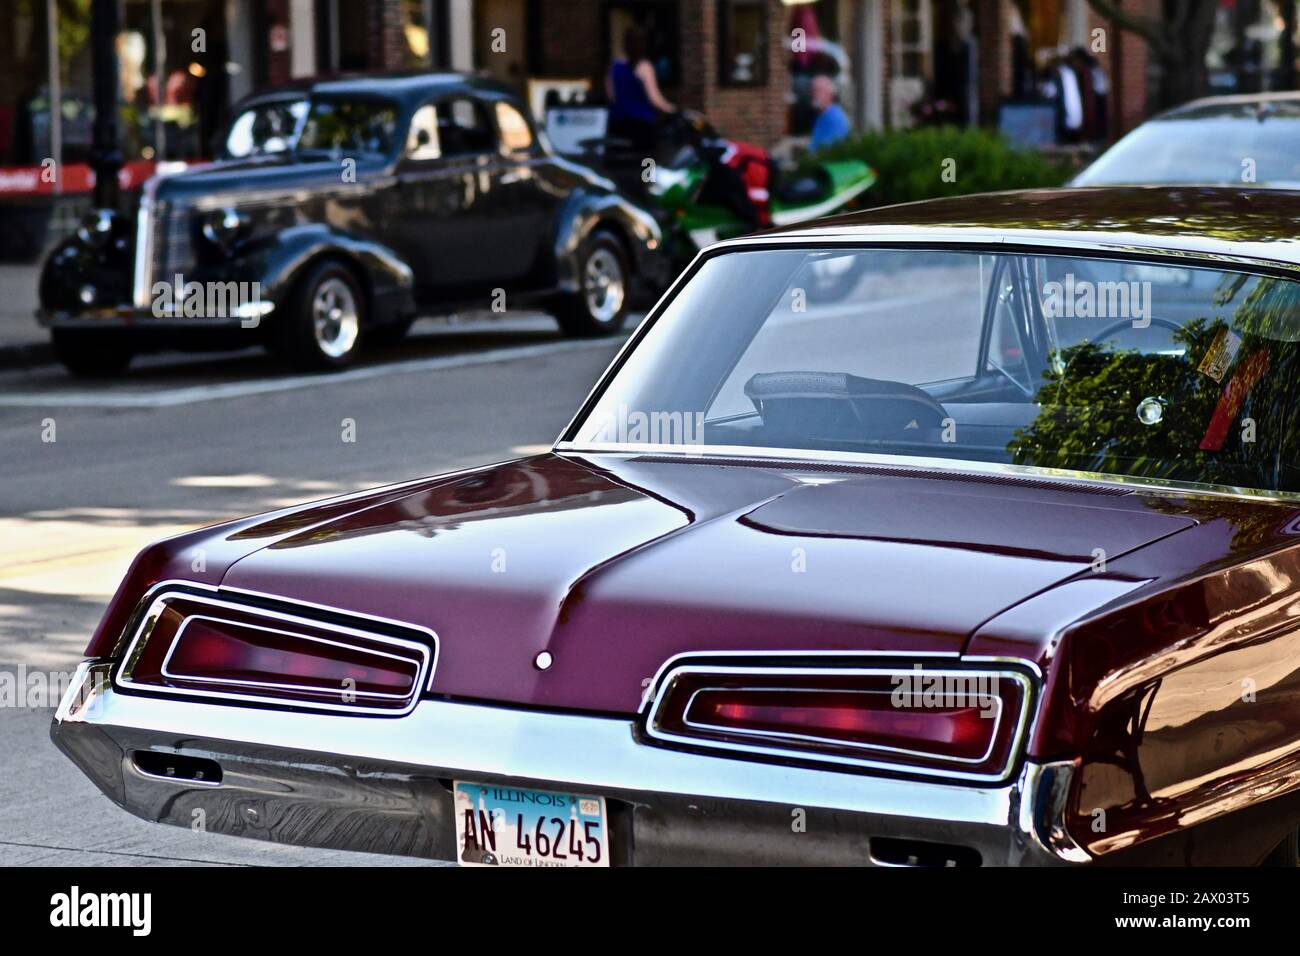 DOWNERS GROVE, UNITED STATES - Jun 07, 2019: A selective focus shot of a shiny maroon vintage car Stock Photo